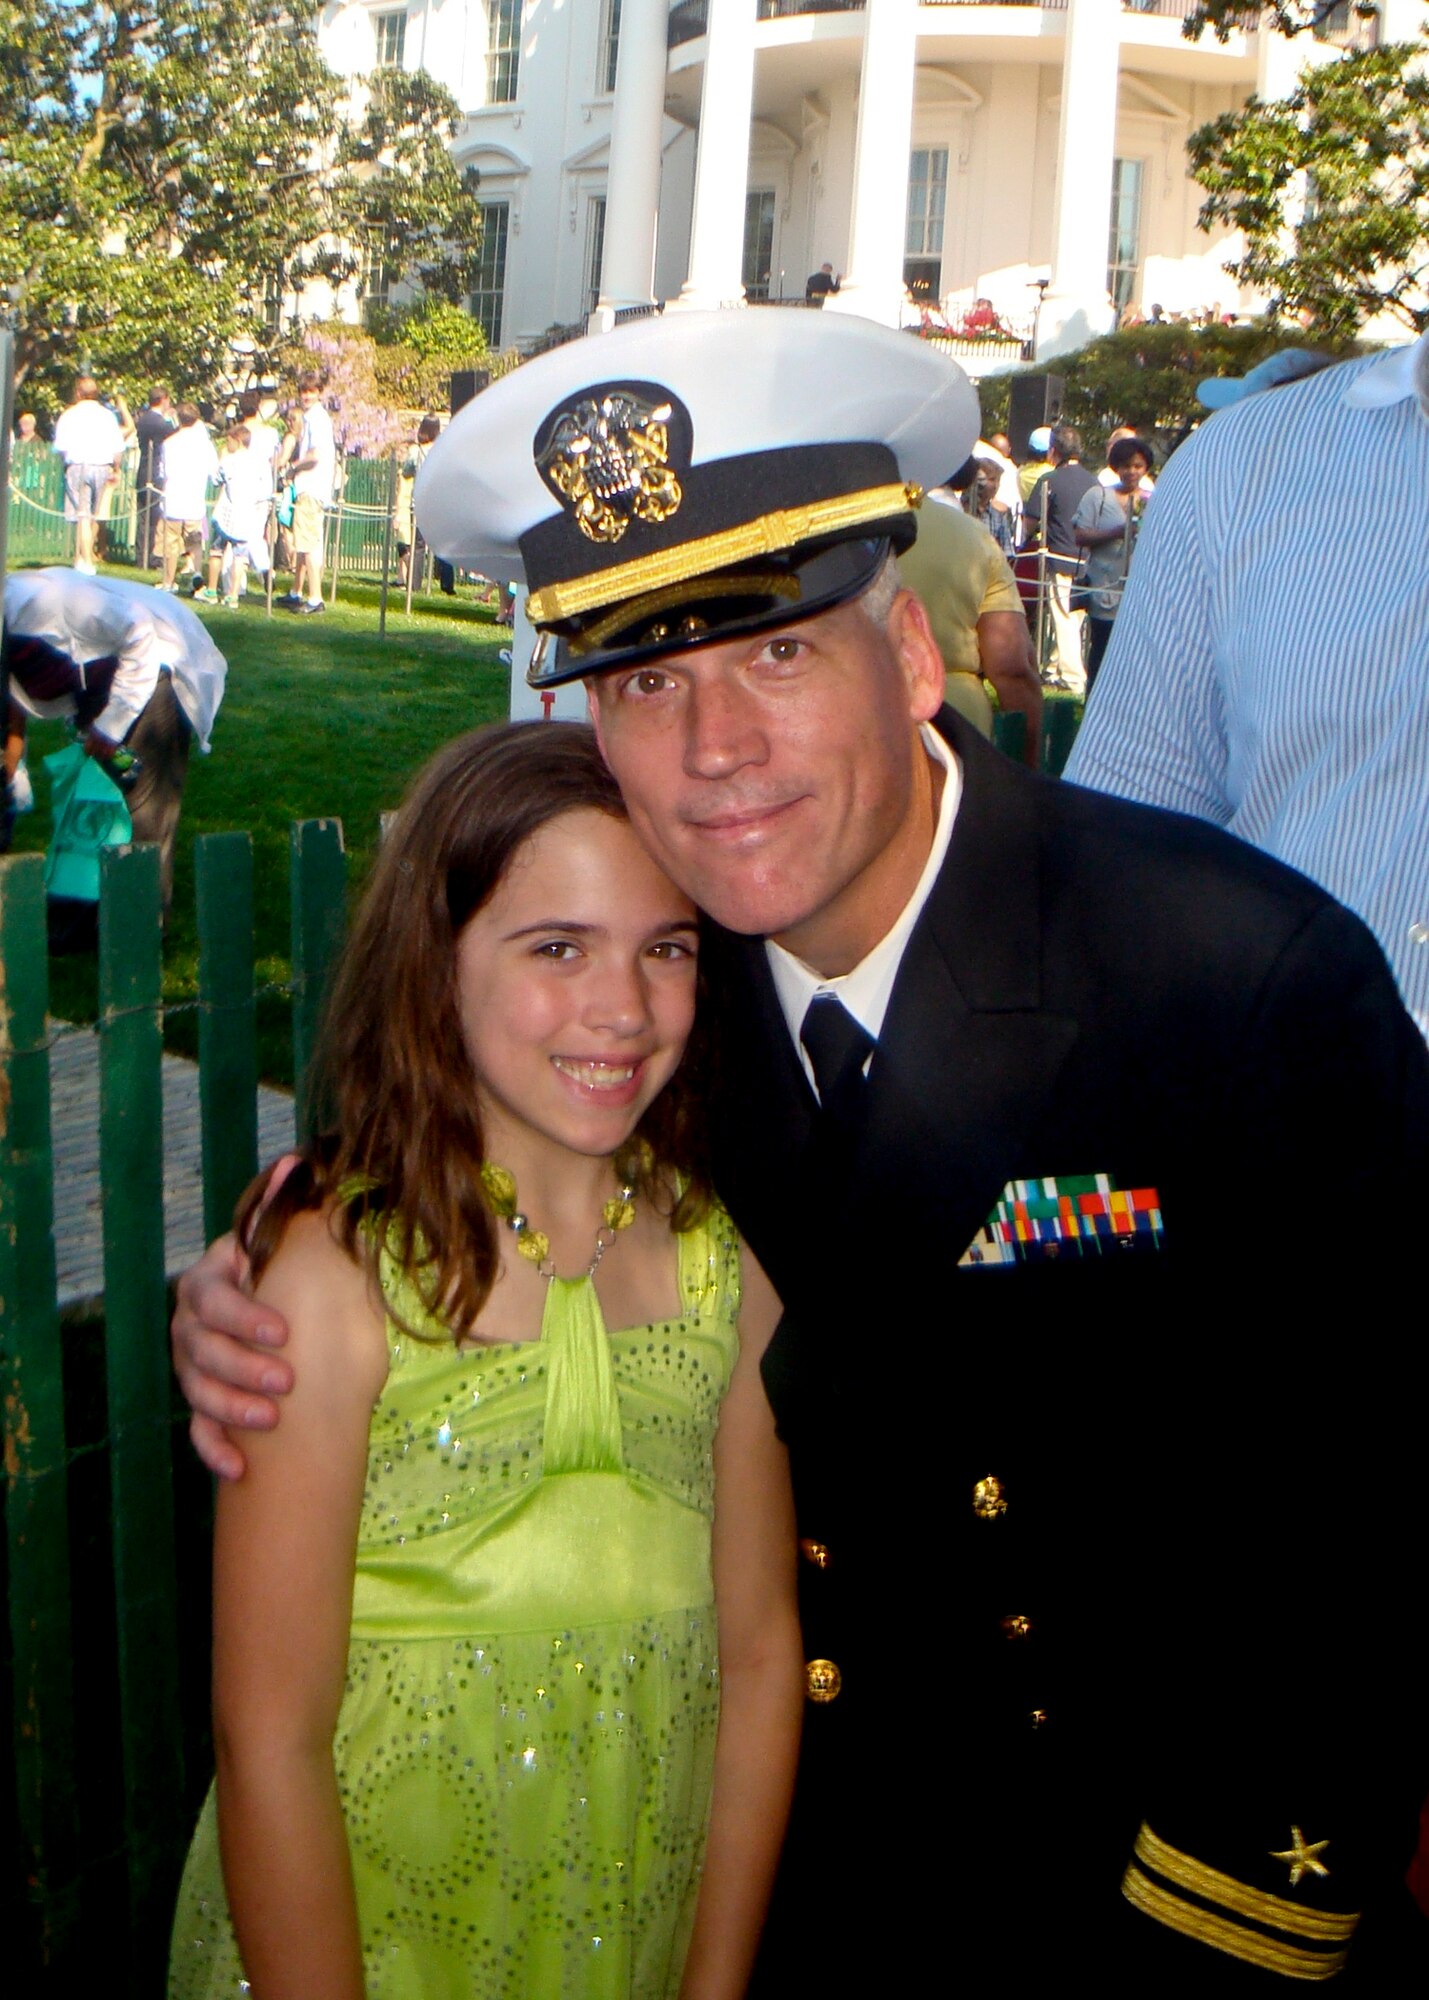 Brent Bassham, of the Armament Directorate and Navy reserve, poses with his daughter, Abigail, outside the White House lawn during the annual Easter celebration and egg roll. The First Family hosted 30,000 people from all 50 states in their backyard for the 133rd White House Easter Egg Roll and once again Eglin was on their invite list.  (Courtesy photo)